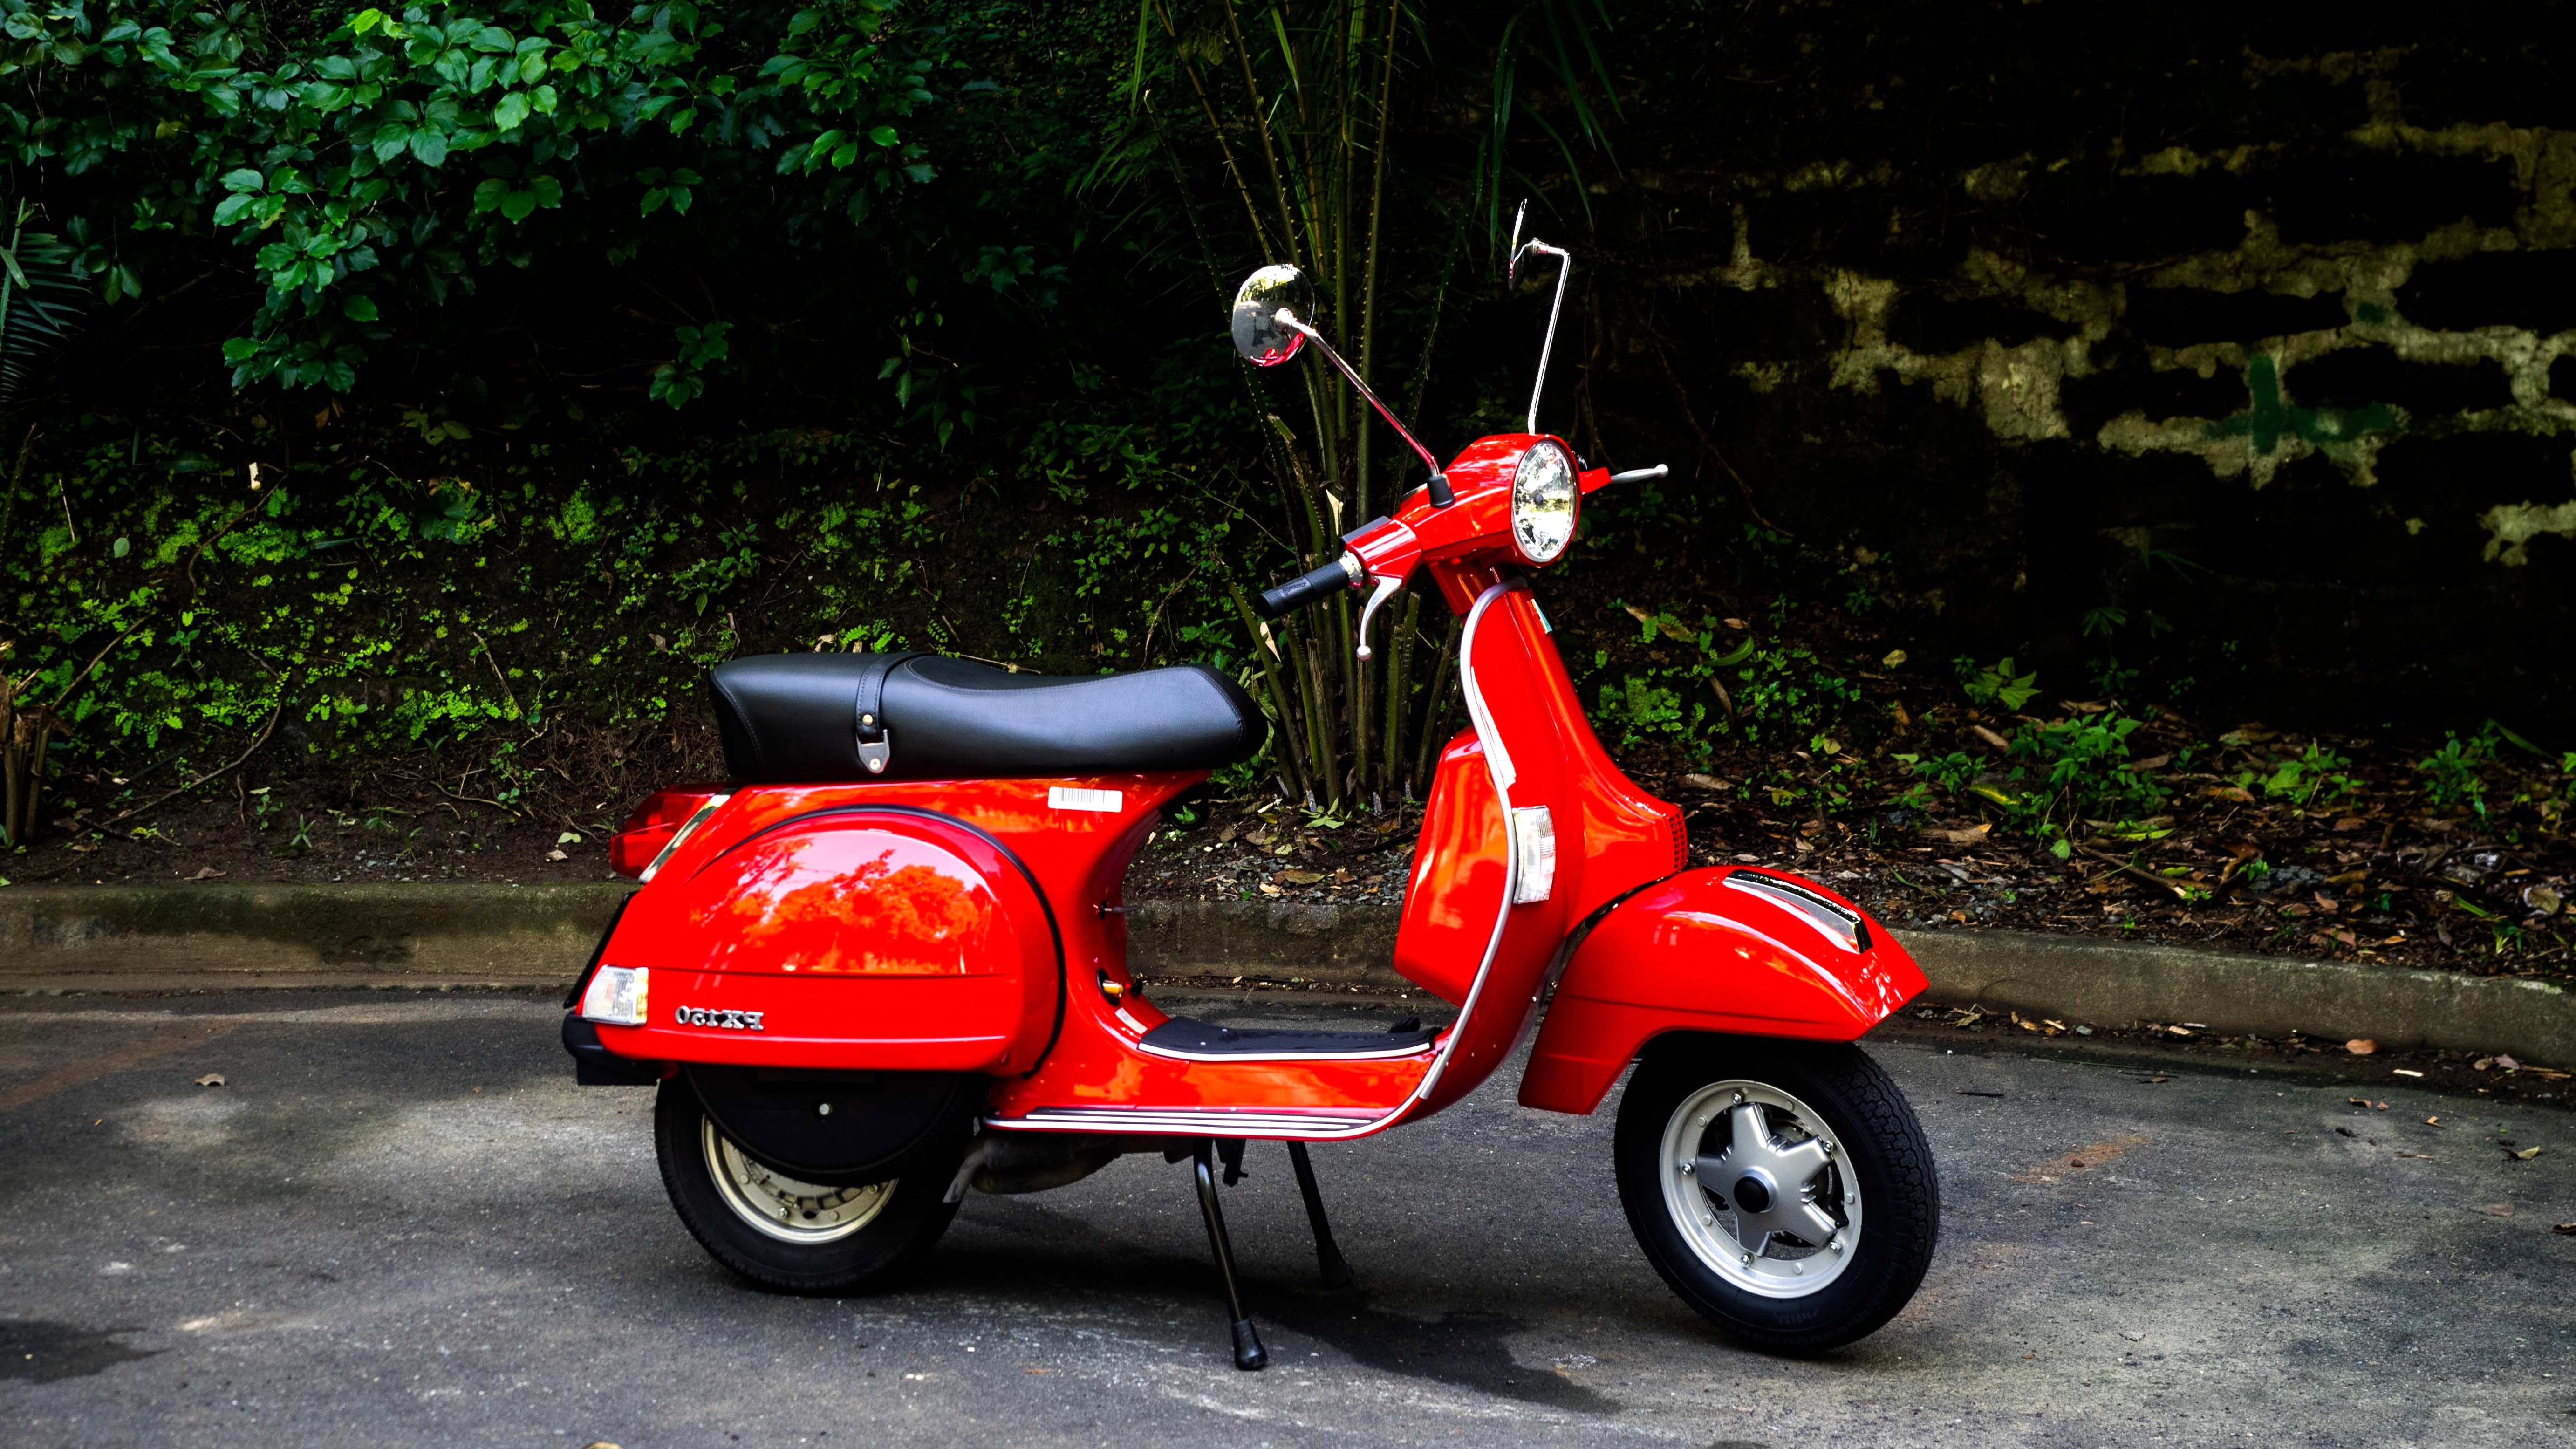  Vespa Px 150  for sale in UK 51 second hand Vespa Px 150 